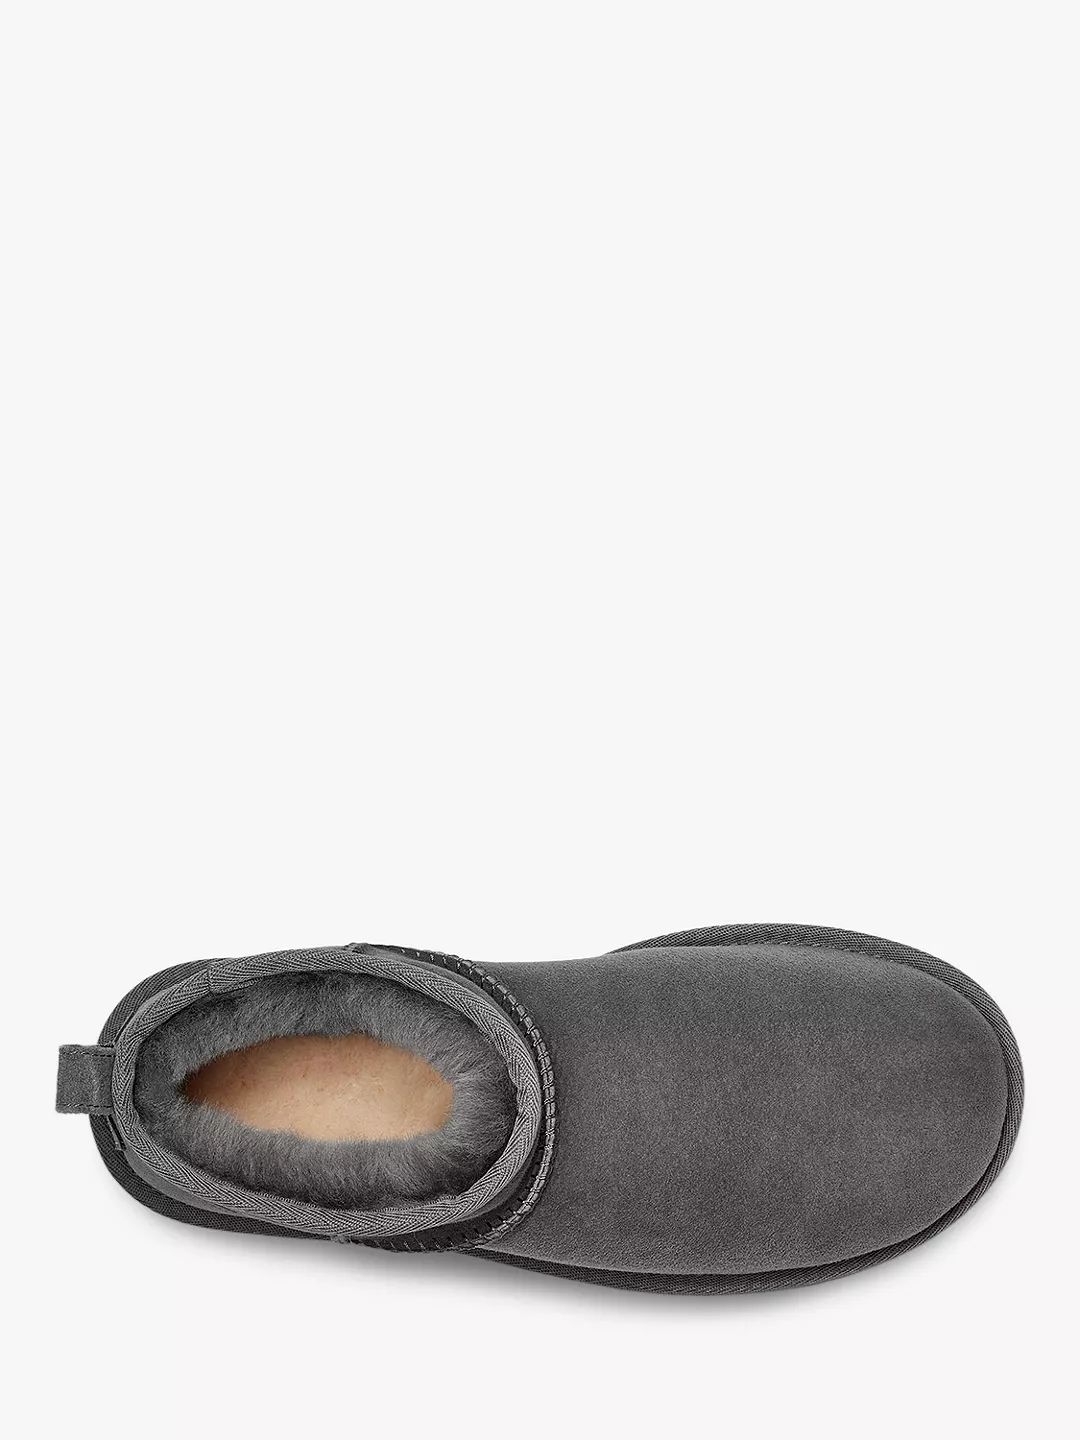 UGG Classic Ultra Mini Sheepskin and Suede Ankle Boots, Grey | John Lewis (UK)